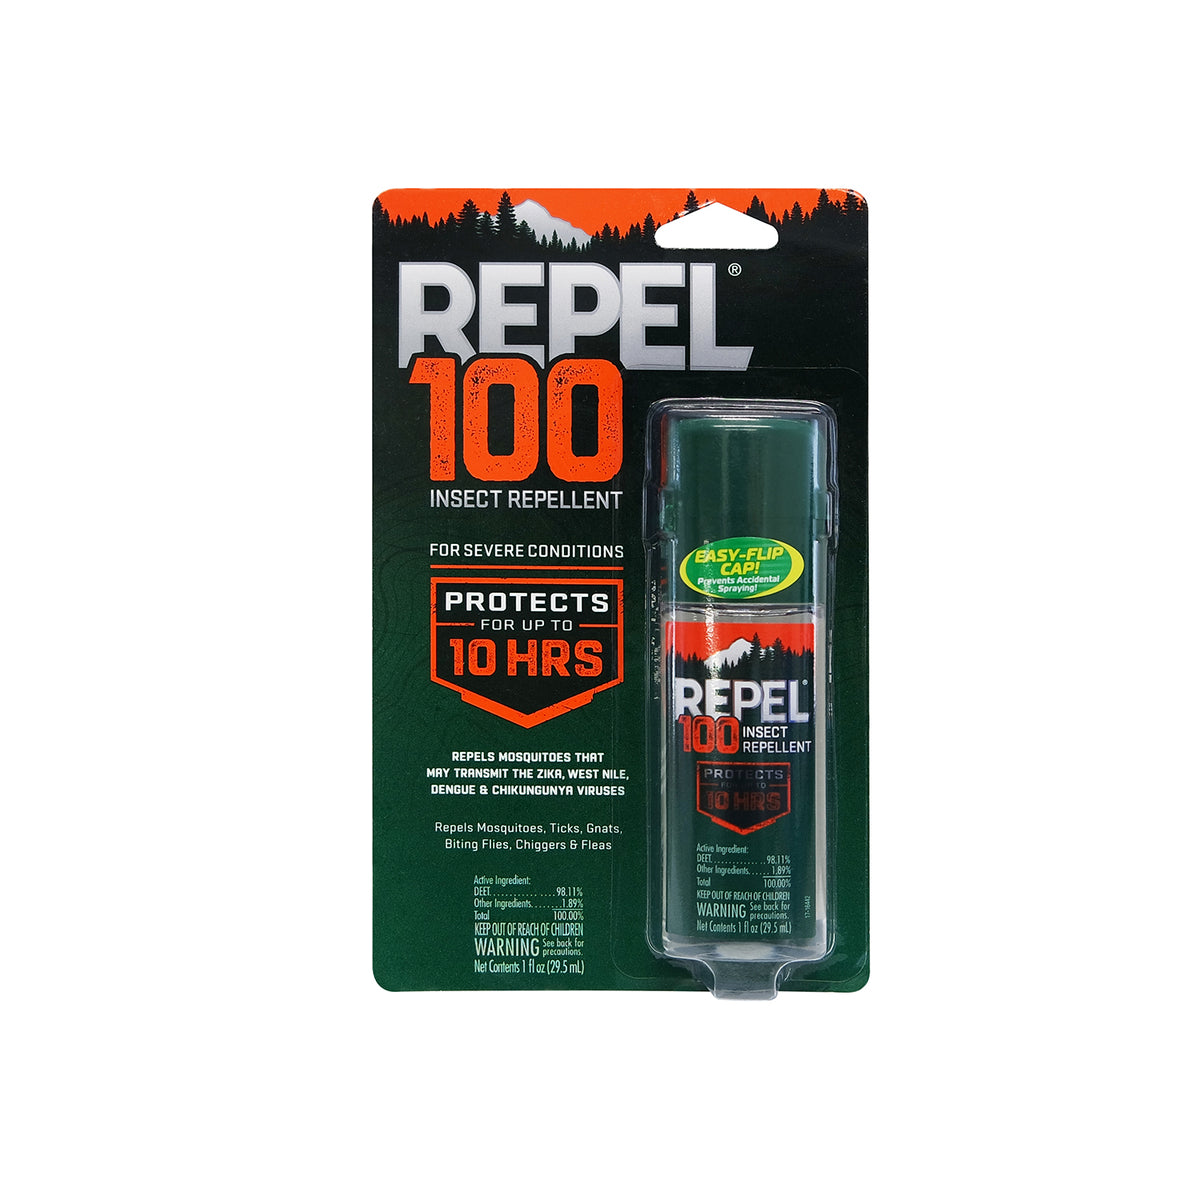 Repel 100 Insect Repellent (Pump Spray) -Safety- eGPS Solutions Inc.